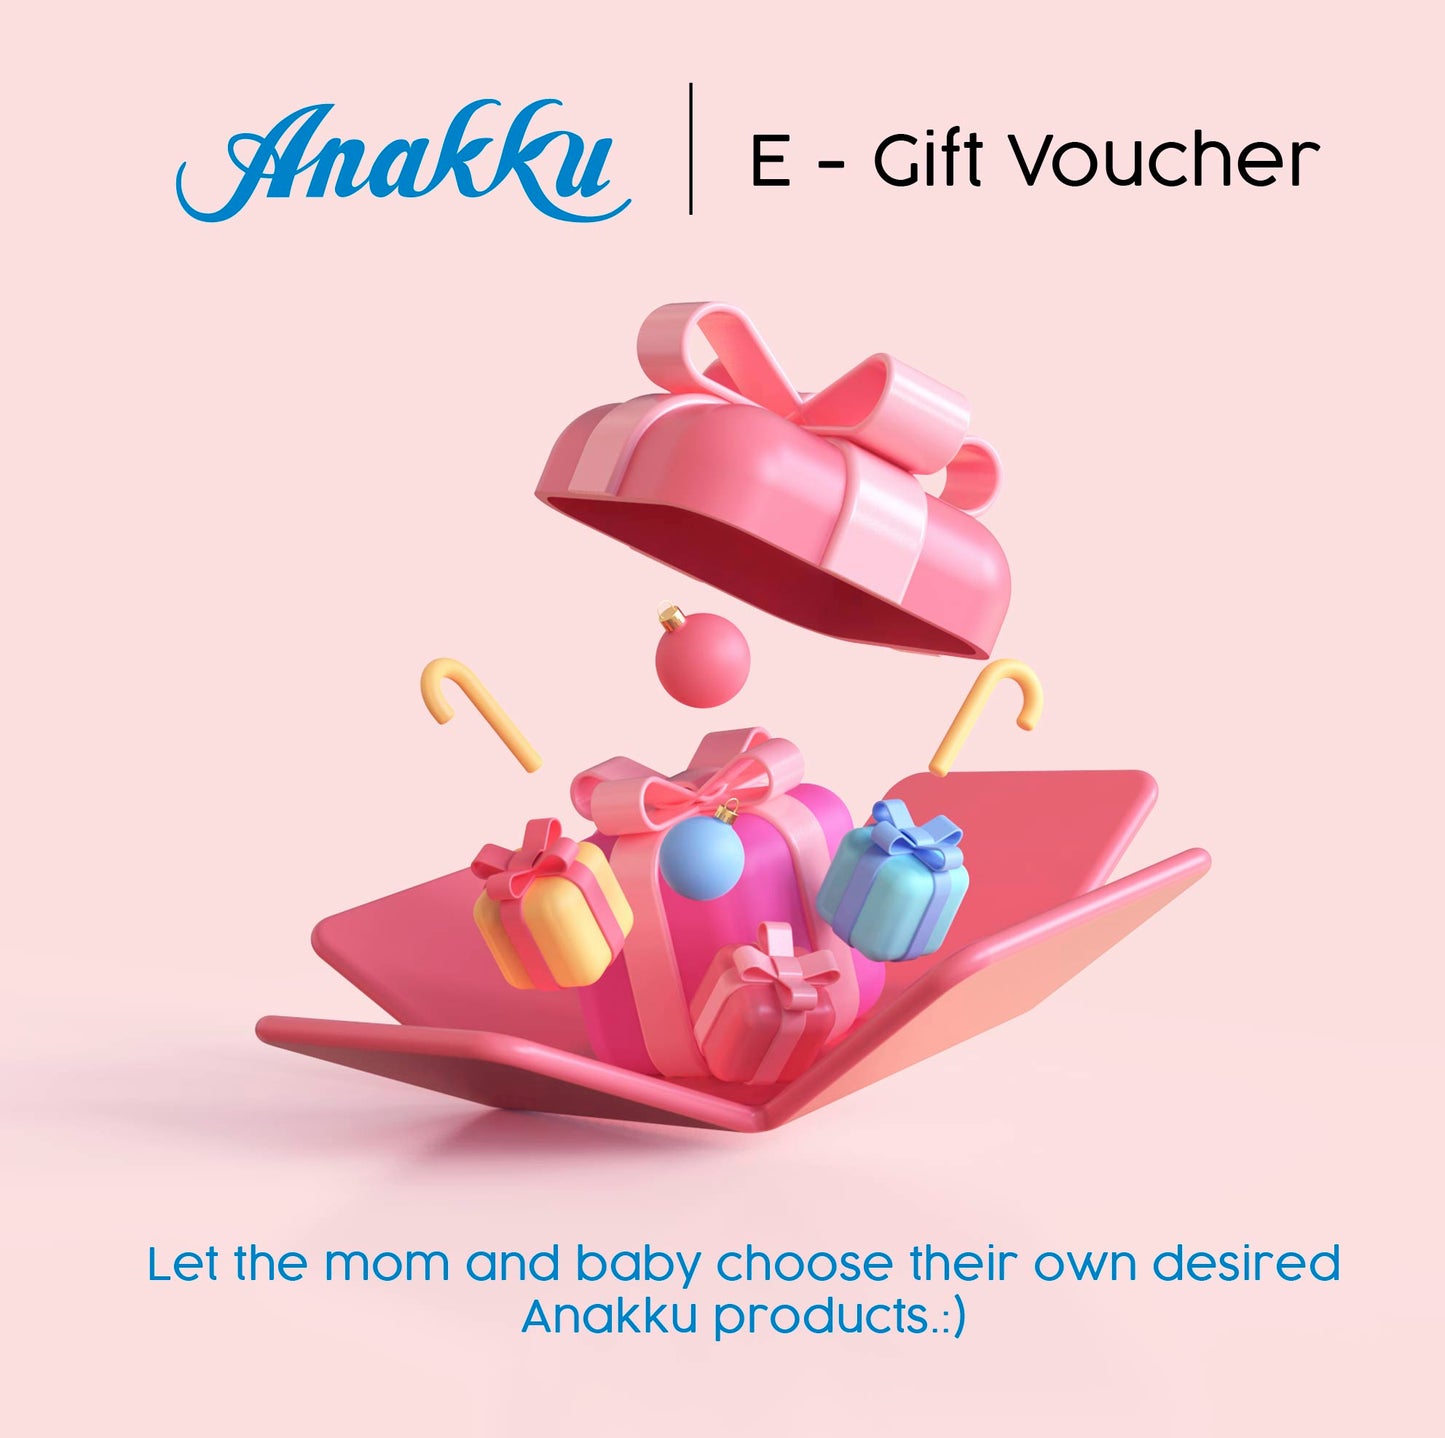 Anakku Gift Voucher For Mom and Baby -  RM50